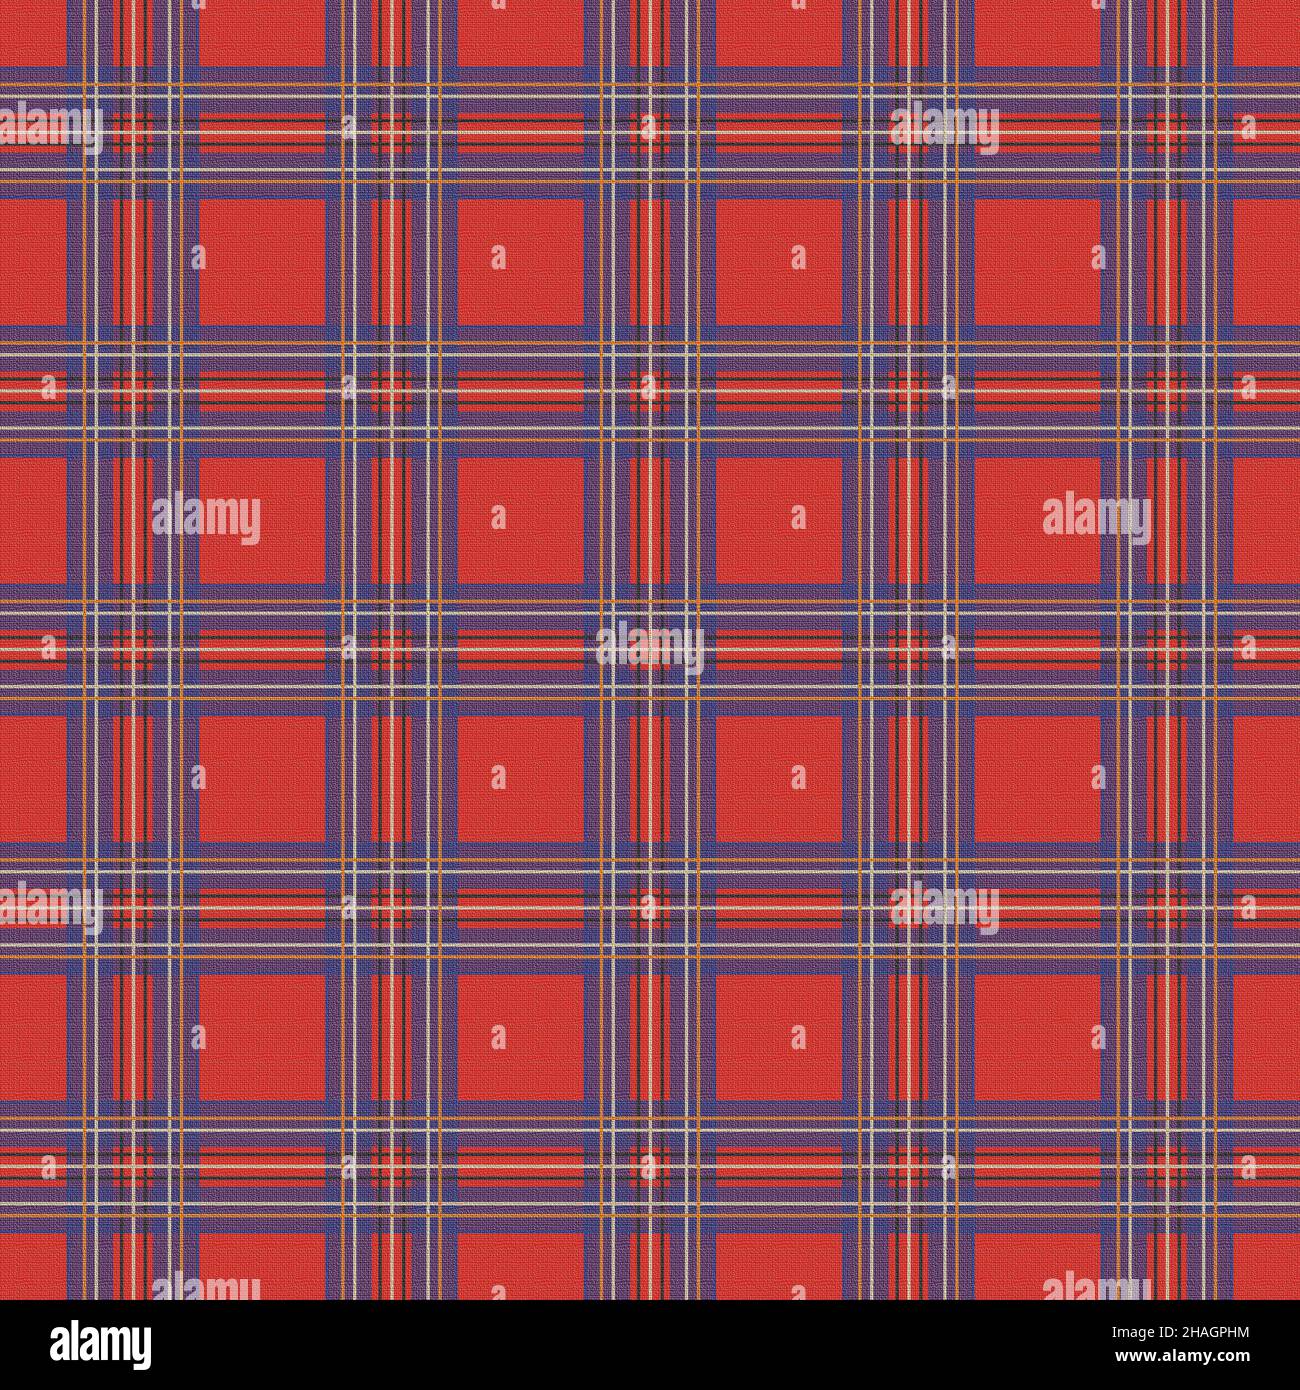 Fabric illustration with colorful tartan seamless pattern. Textured plaid background. High quality illustration Stock Photo